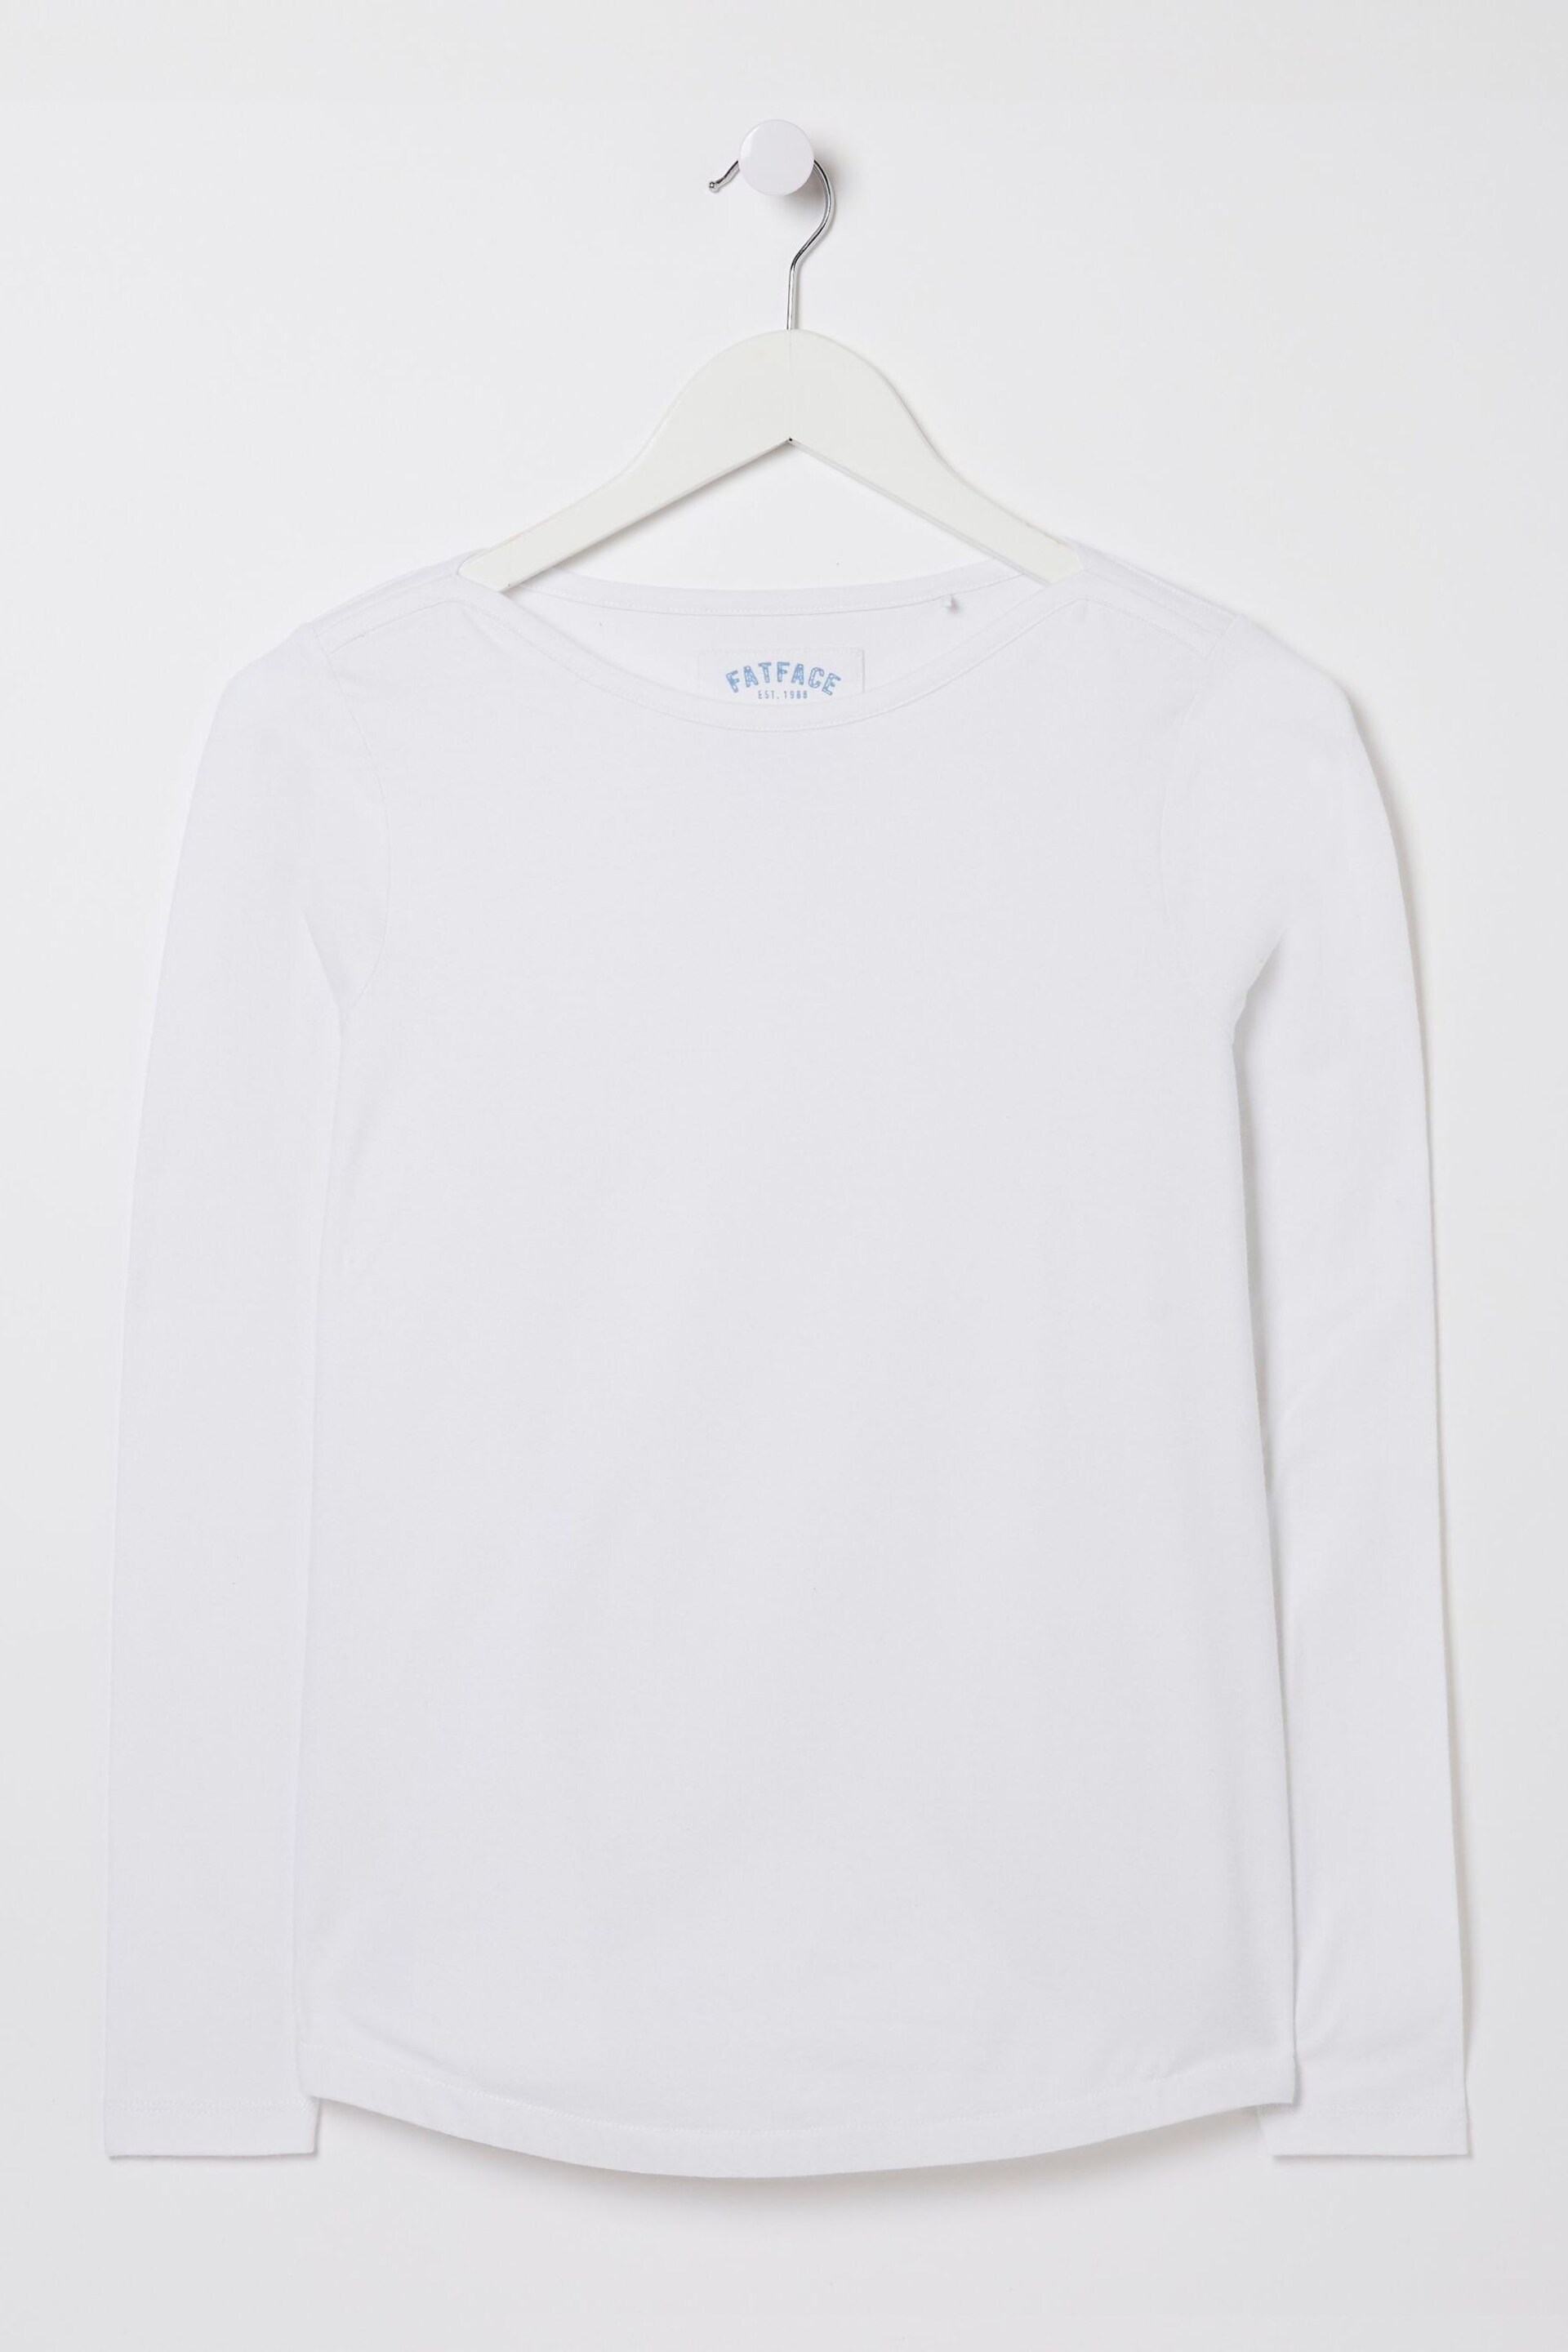 FatFace White T-Shirt - Image 4 of 4